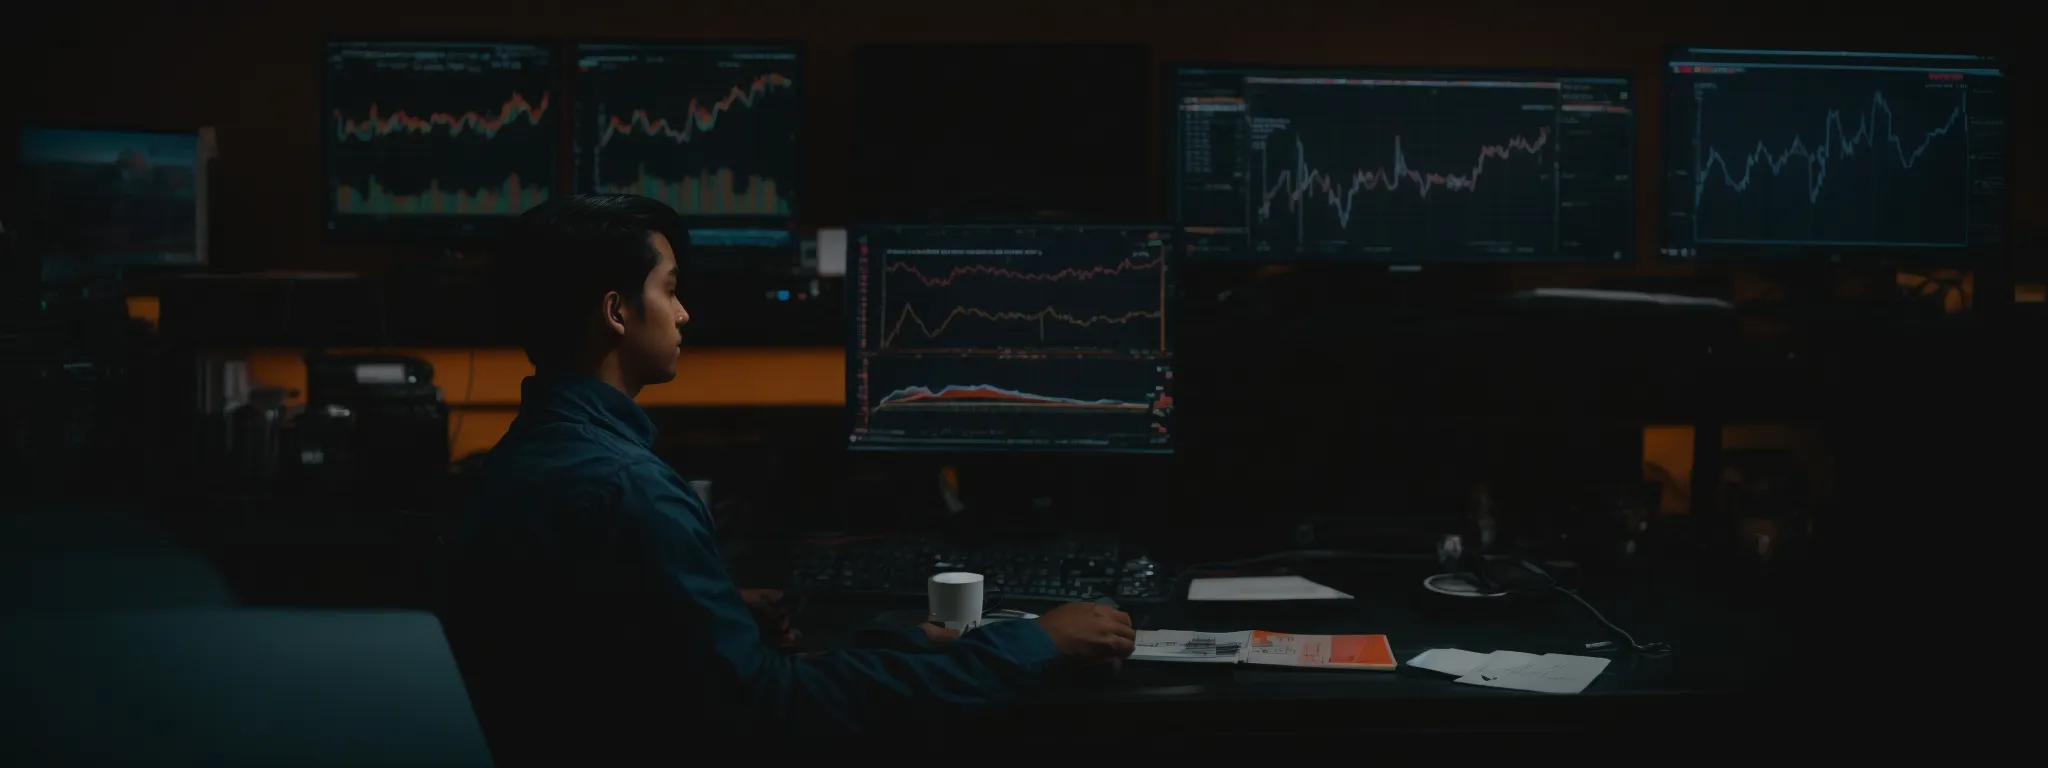 a person sitting before a computer with multiple graphs and analytics displayed on the screen.